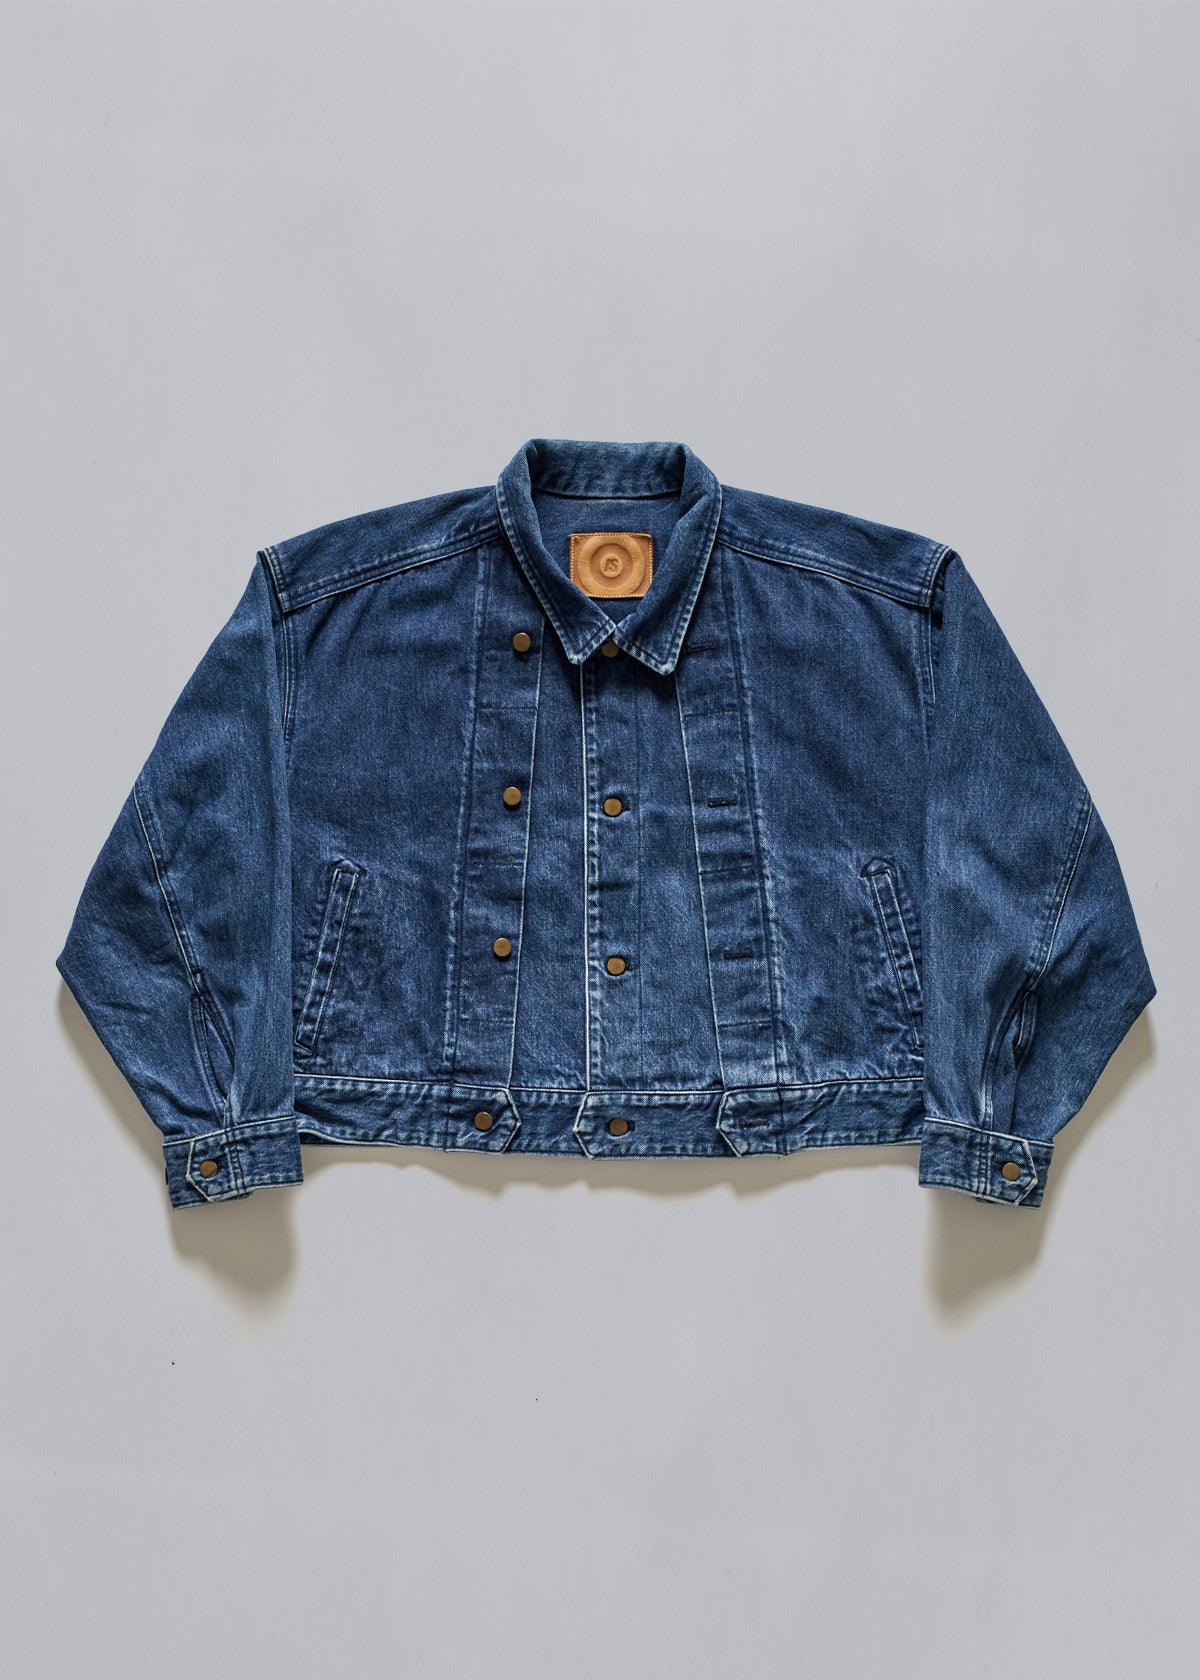 Issey Sport Double Breasted Denim Jacket 1980's - Small - The Archivist Store